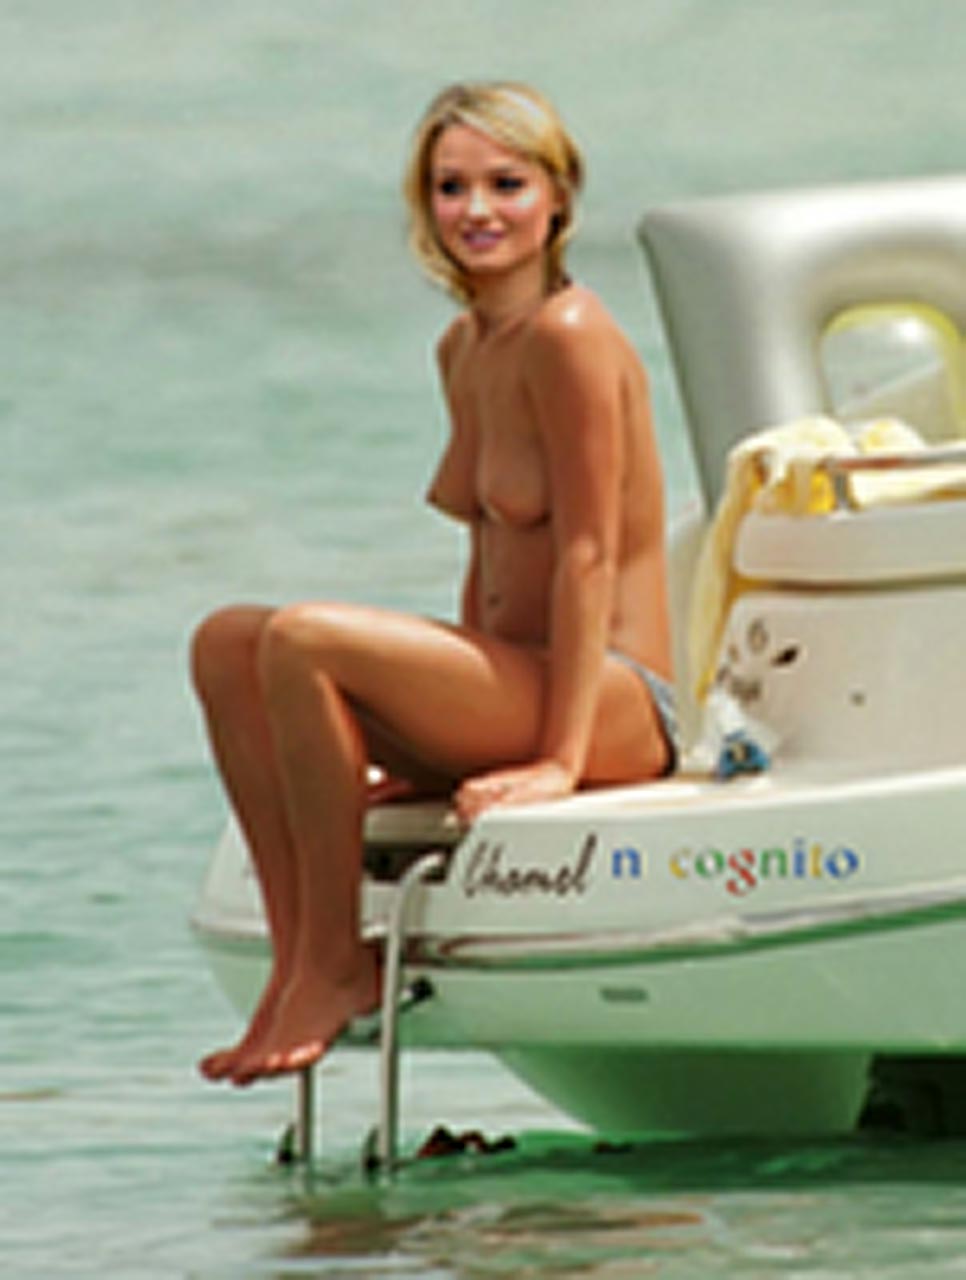 Then after many nudes and leaked content of hottie blonde Emma Rigby, we ha...